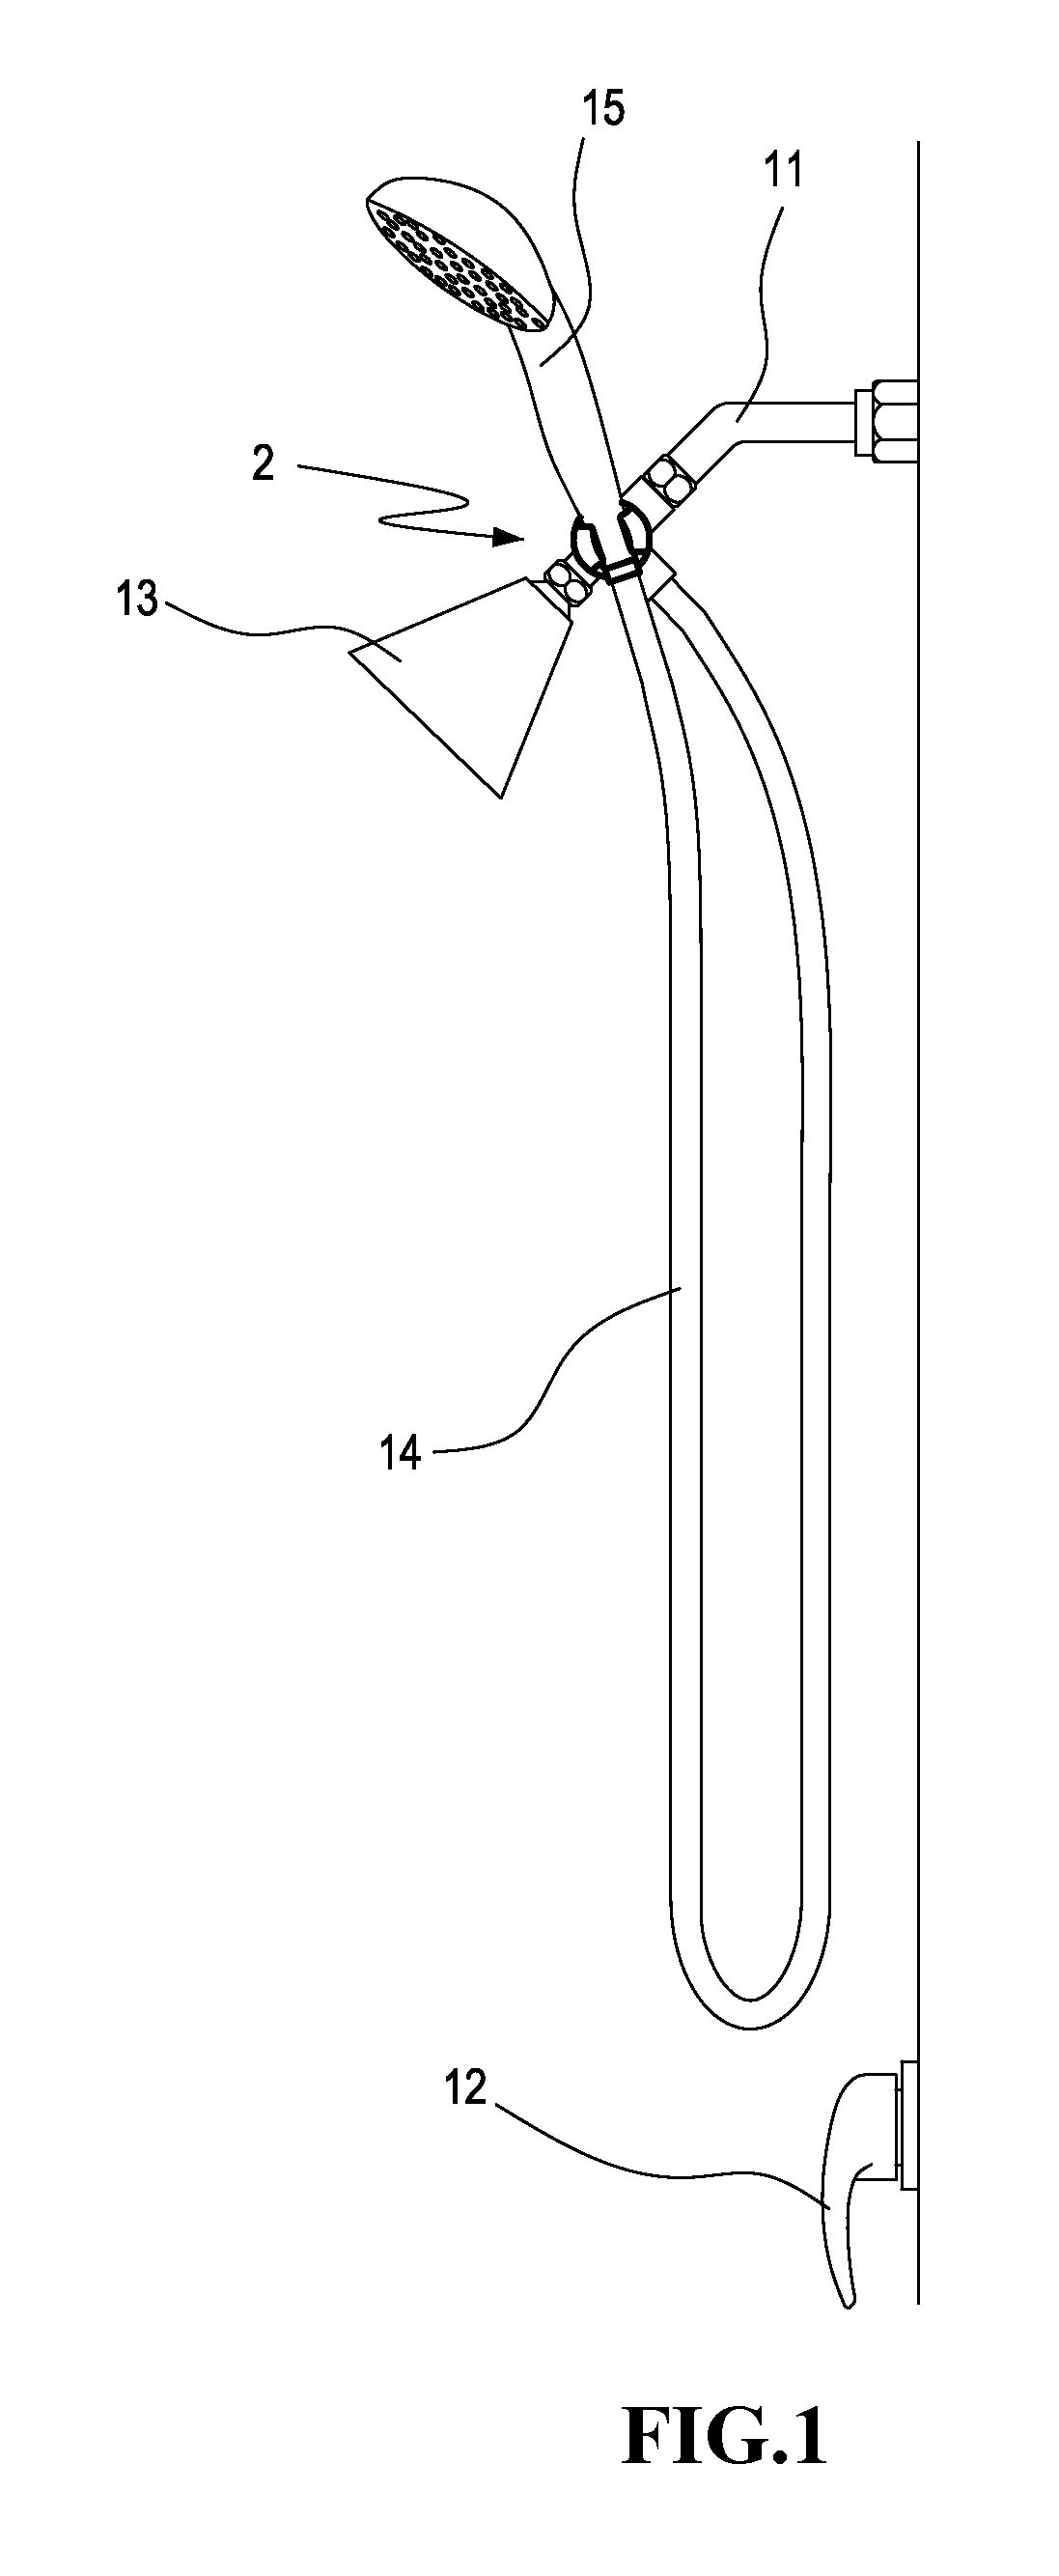 Diverter assembly for use in holding shower head and shower nozzle